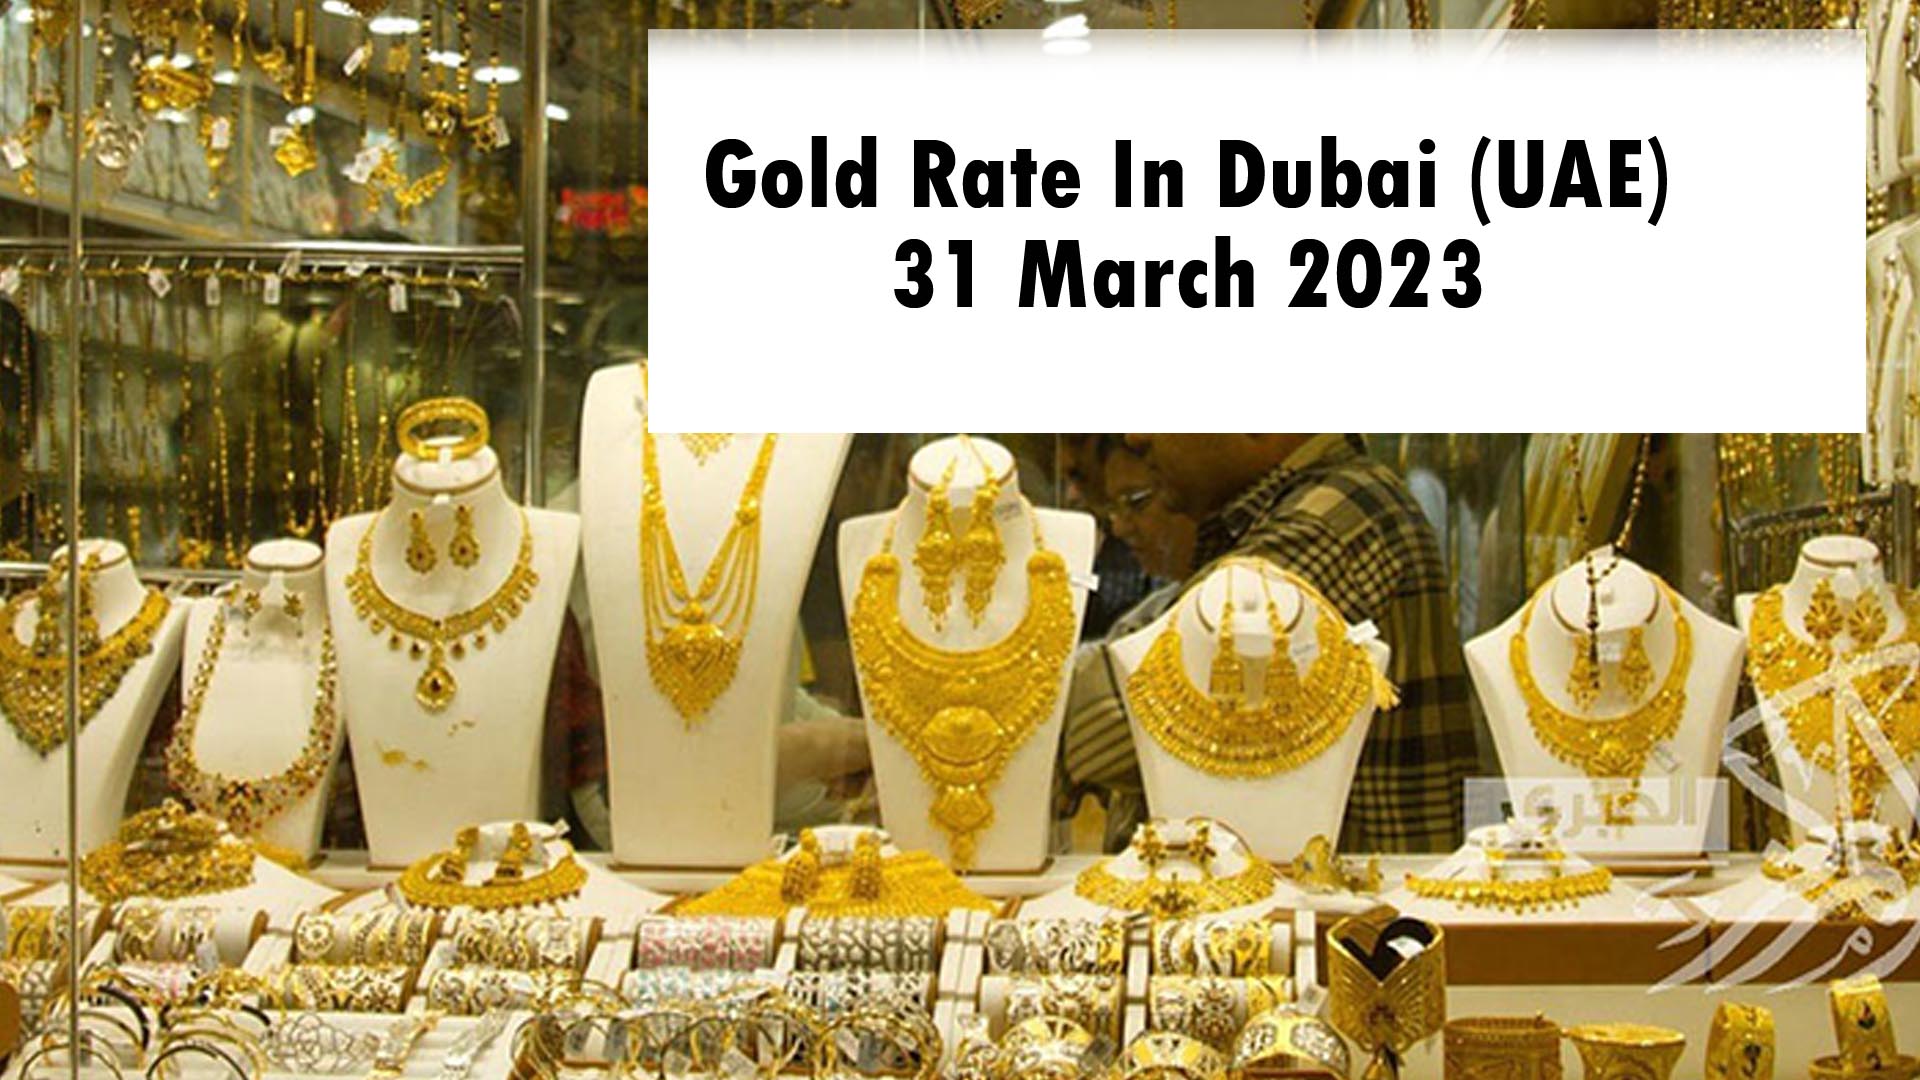 Gold Rate In Dubai (UAE) Today 31 March 2023